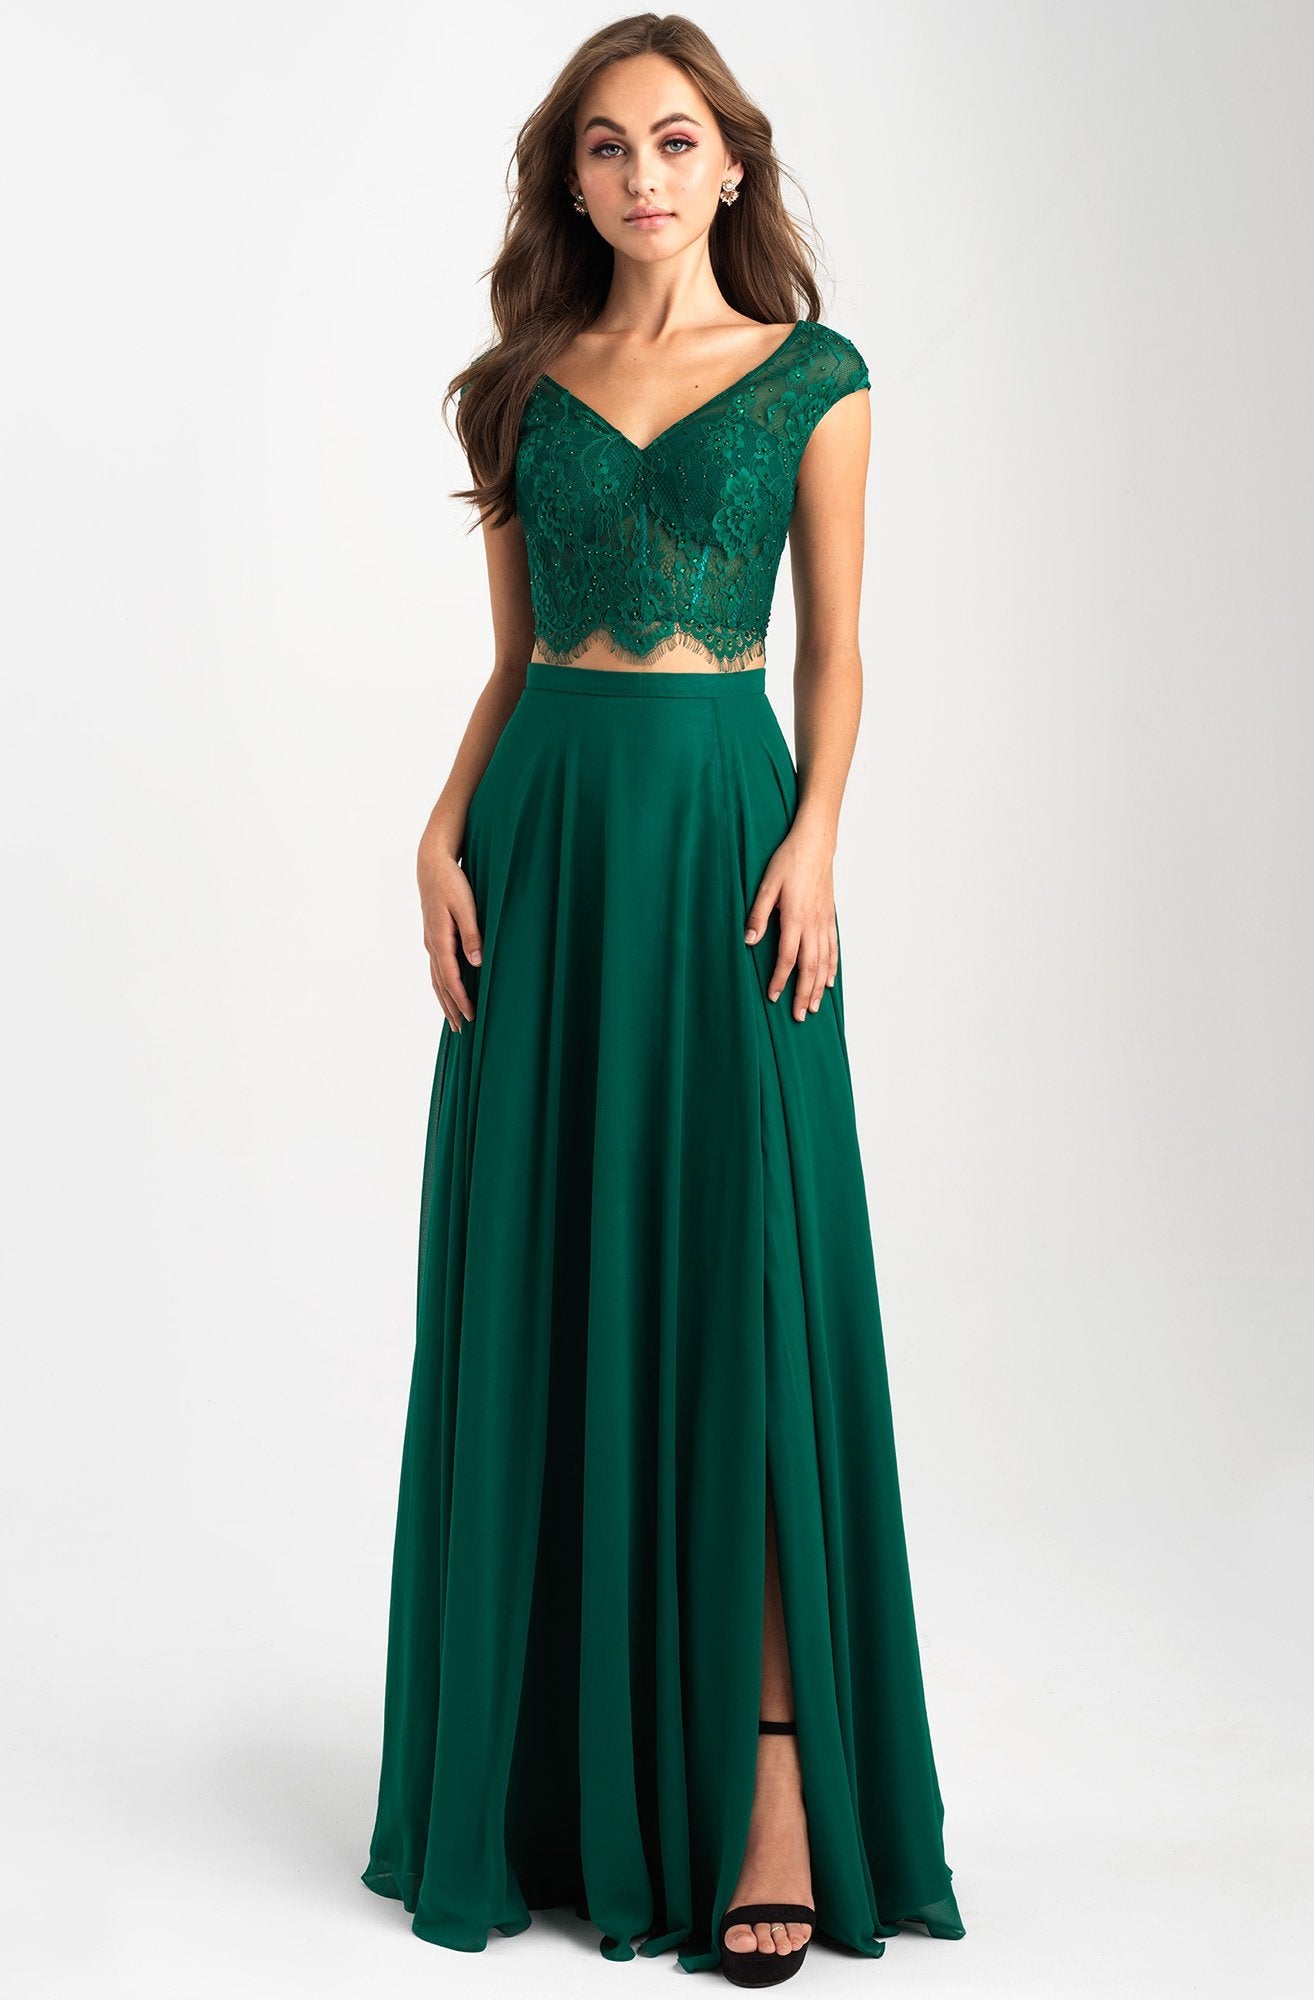 Madison James - Two-Piece Scalloped Lace Bodice High Slit Dress 20-377 In Green